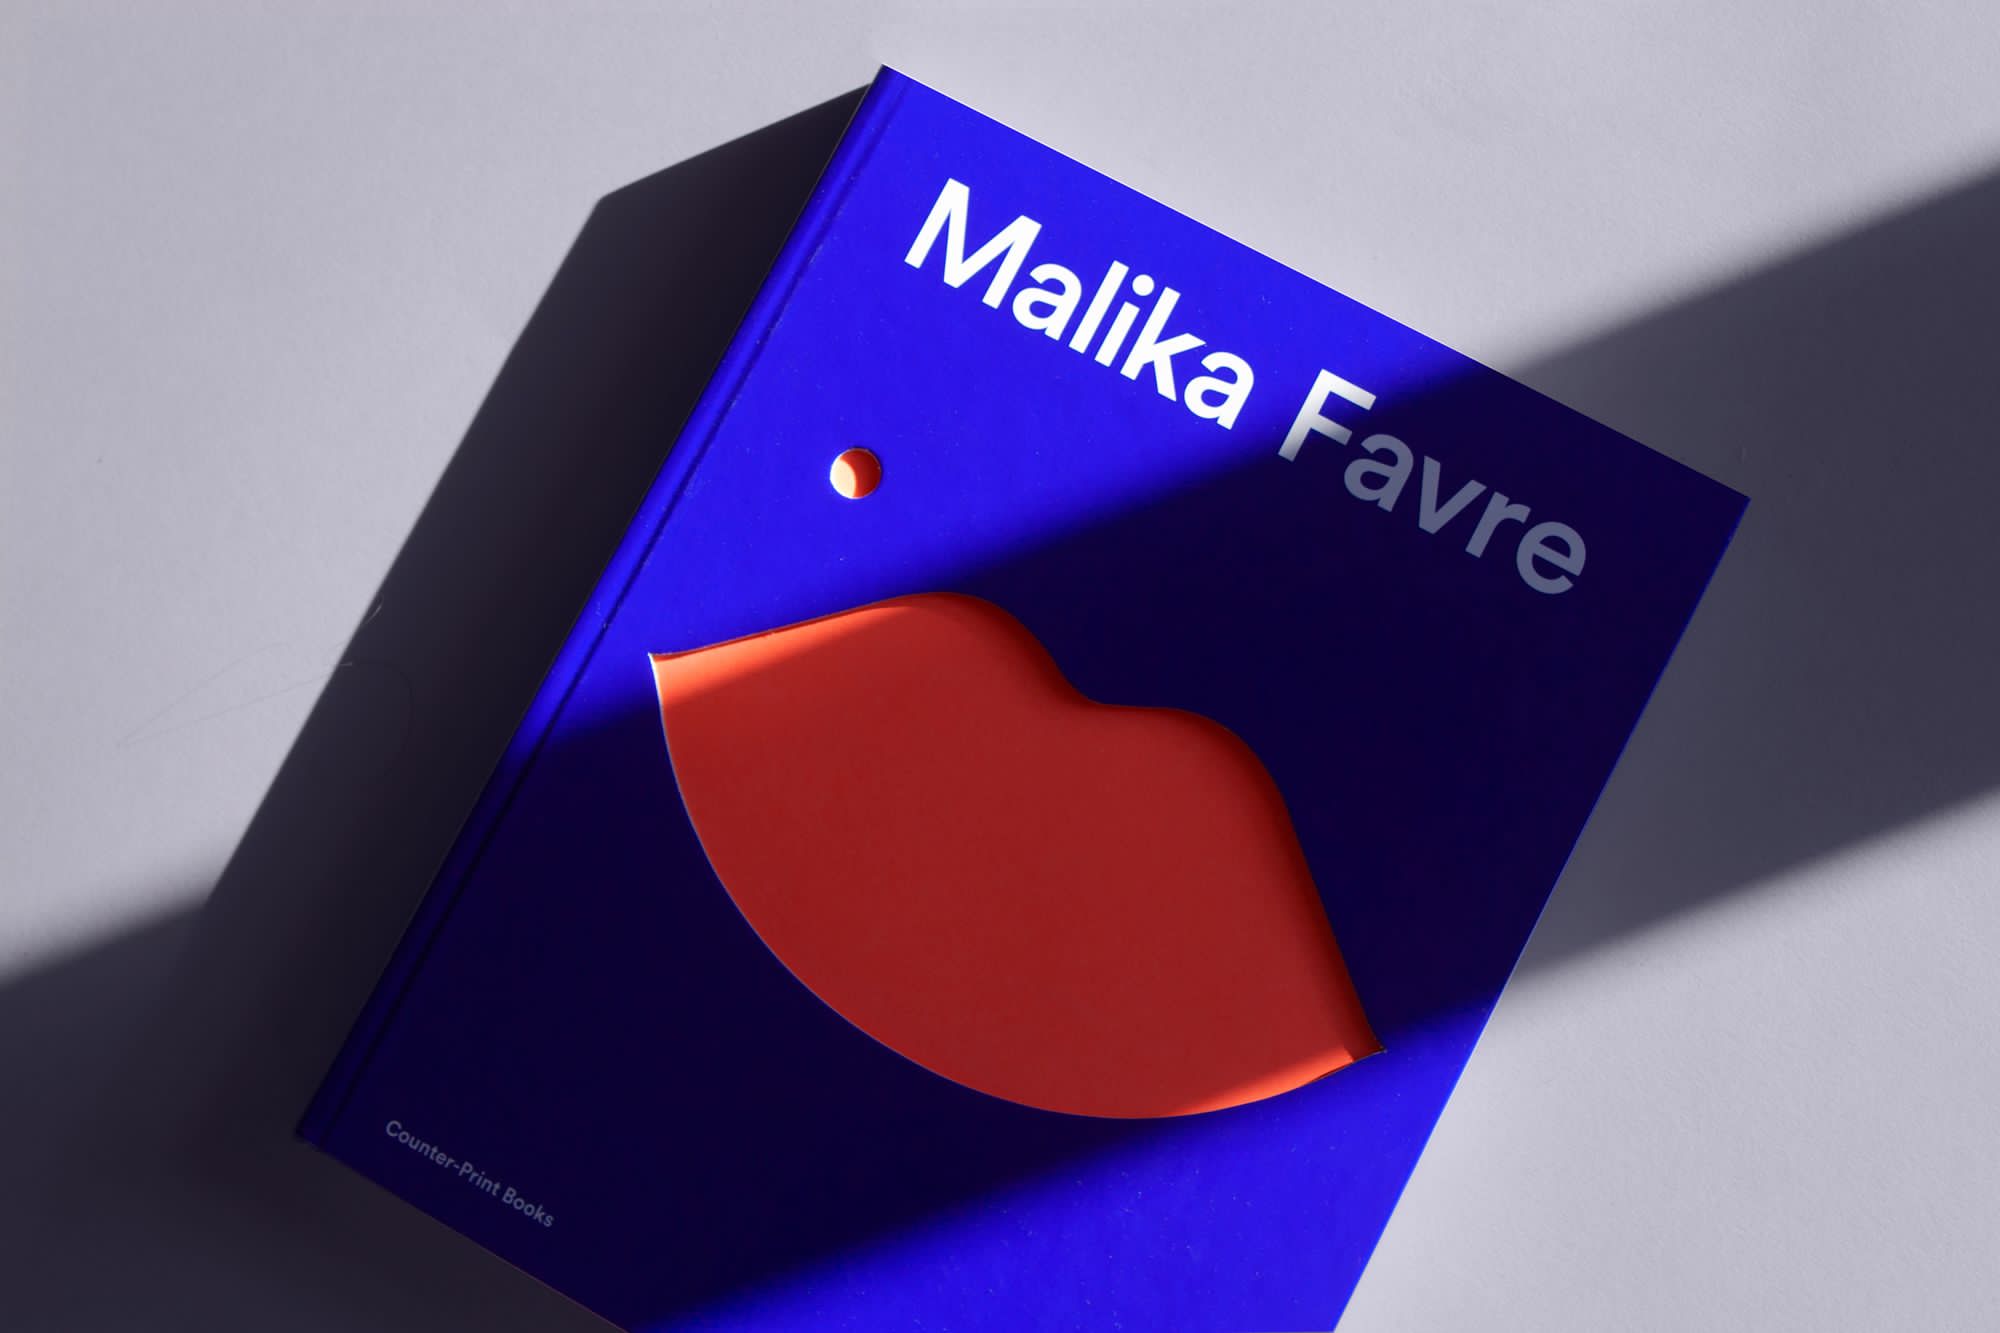 Introducing the expanded edition of 'Malika Favre'